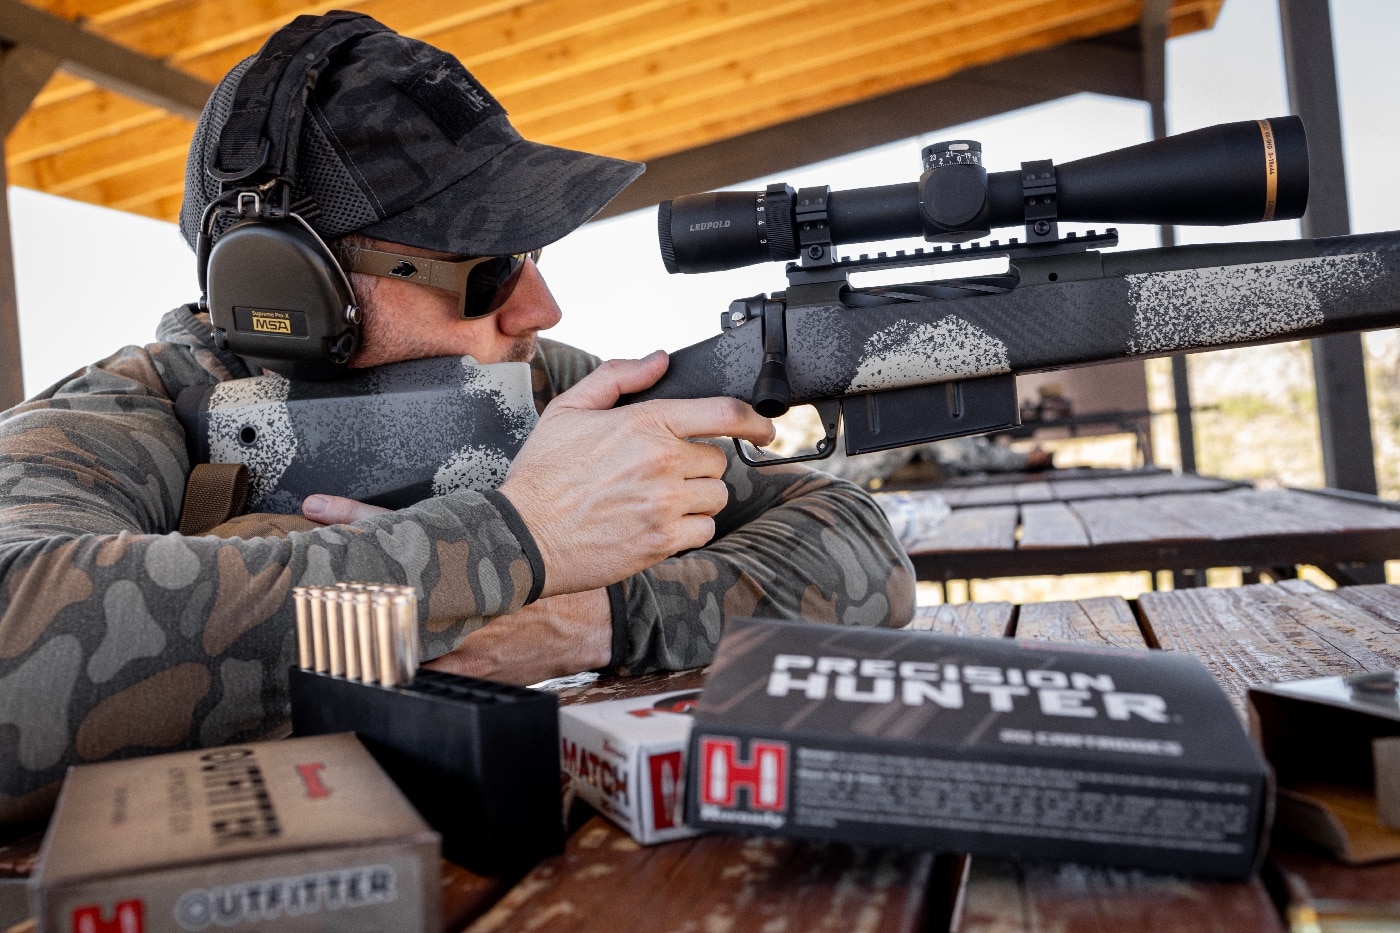 In this photo, we see the author shooting the Model 2020 Long-Action Waypoint on the shooting range. He is testing the precision trigger from TriggerTech. He found it to have a clean pull and release with repeatable results.